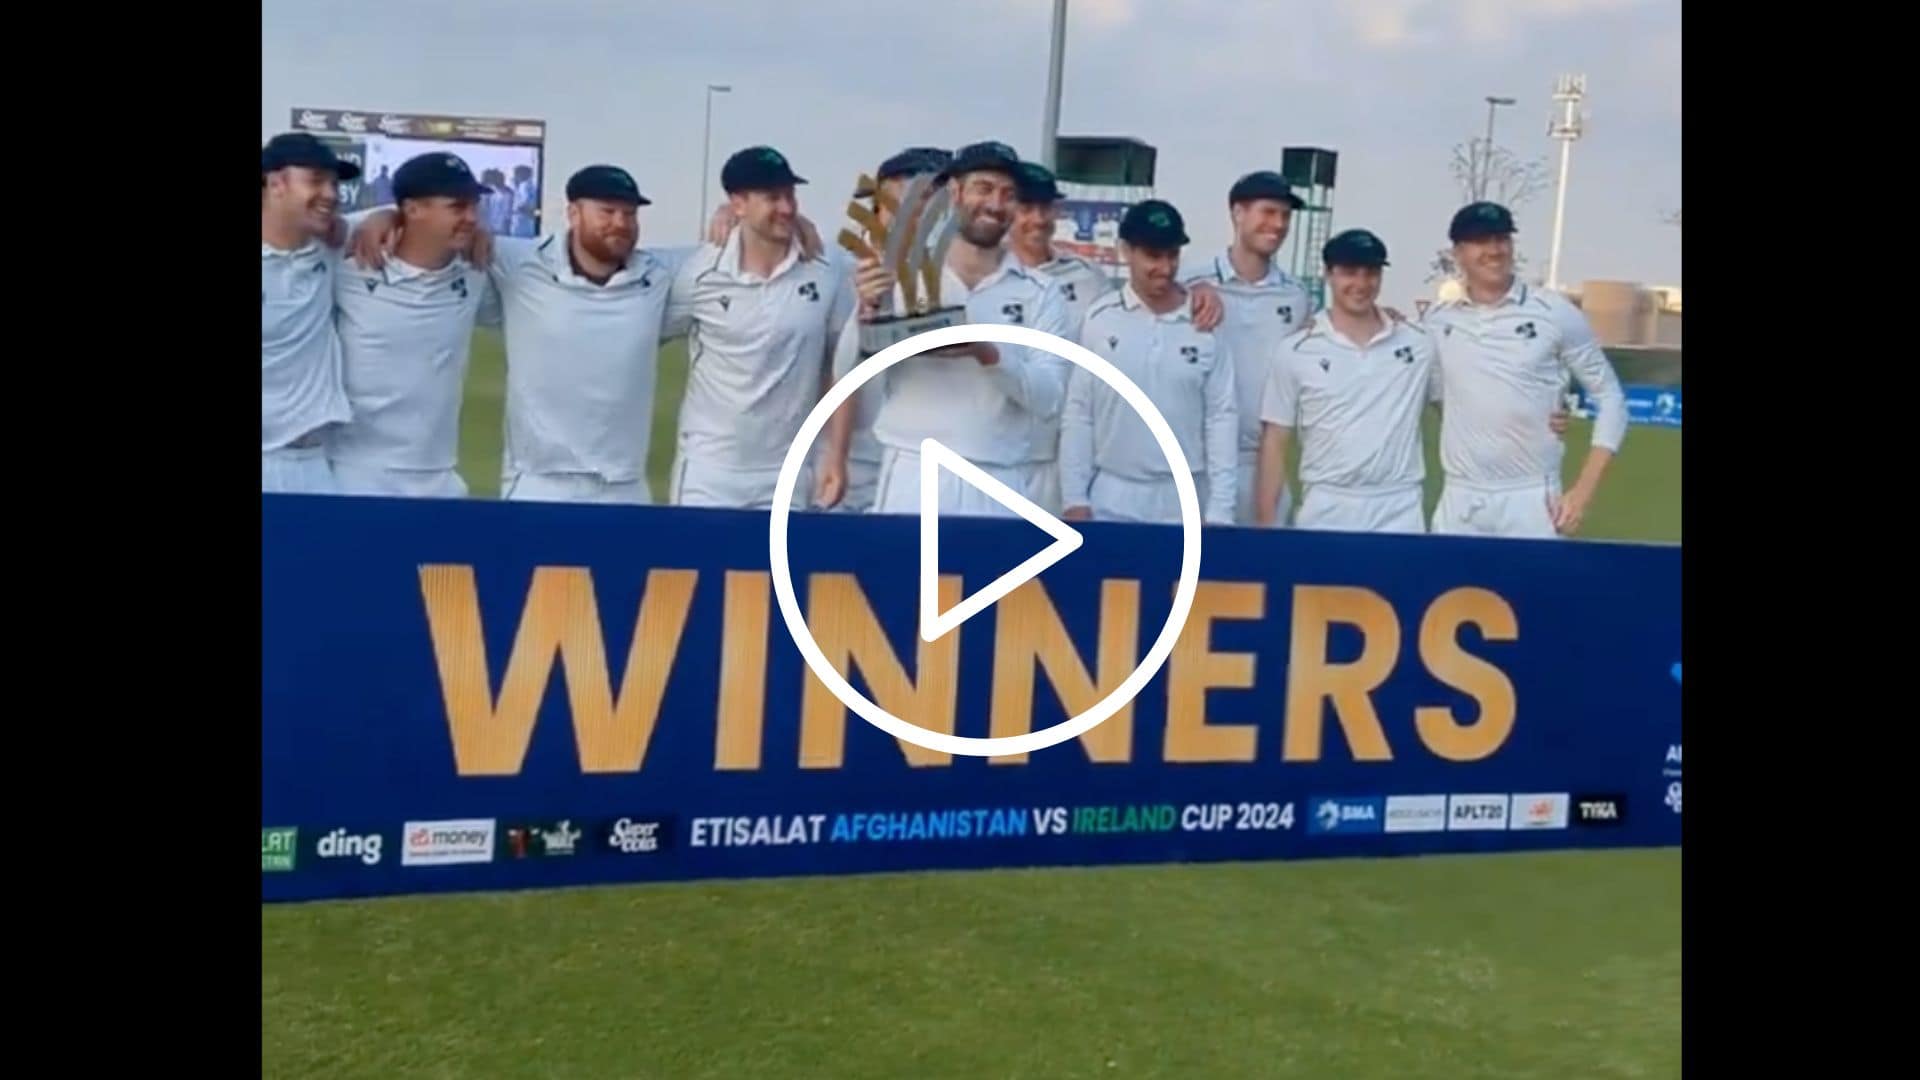 [Watch] Ireland Players Celebrate With Trophy After Historic Test Win Against Afghanistan